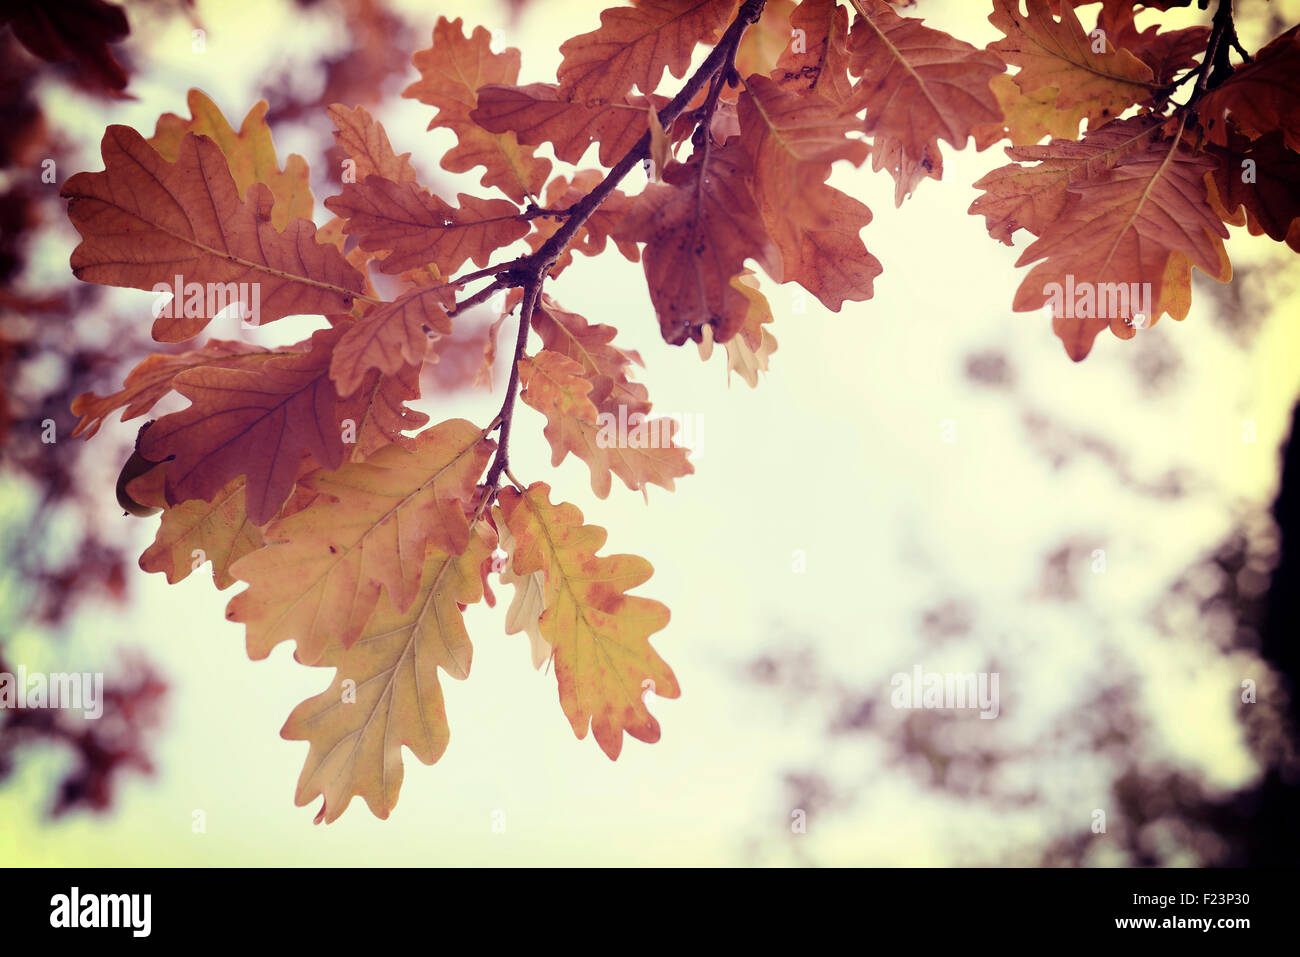 Fall season oak autumn tree leaves close up in sunset background with vintage style filter. Stock Photo